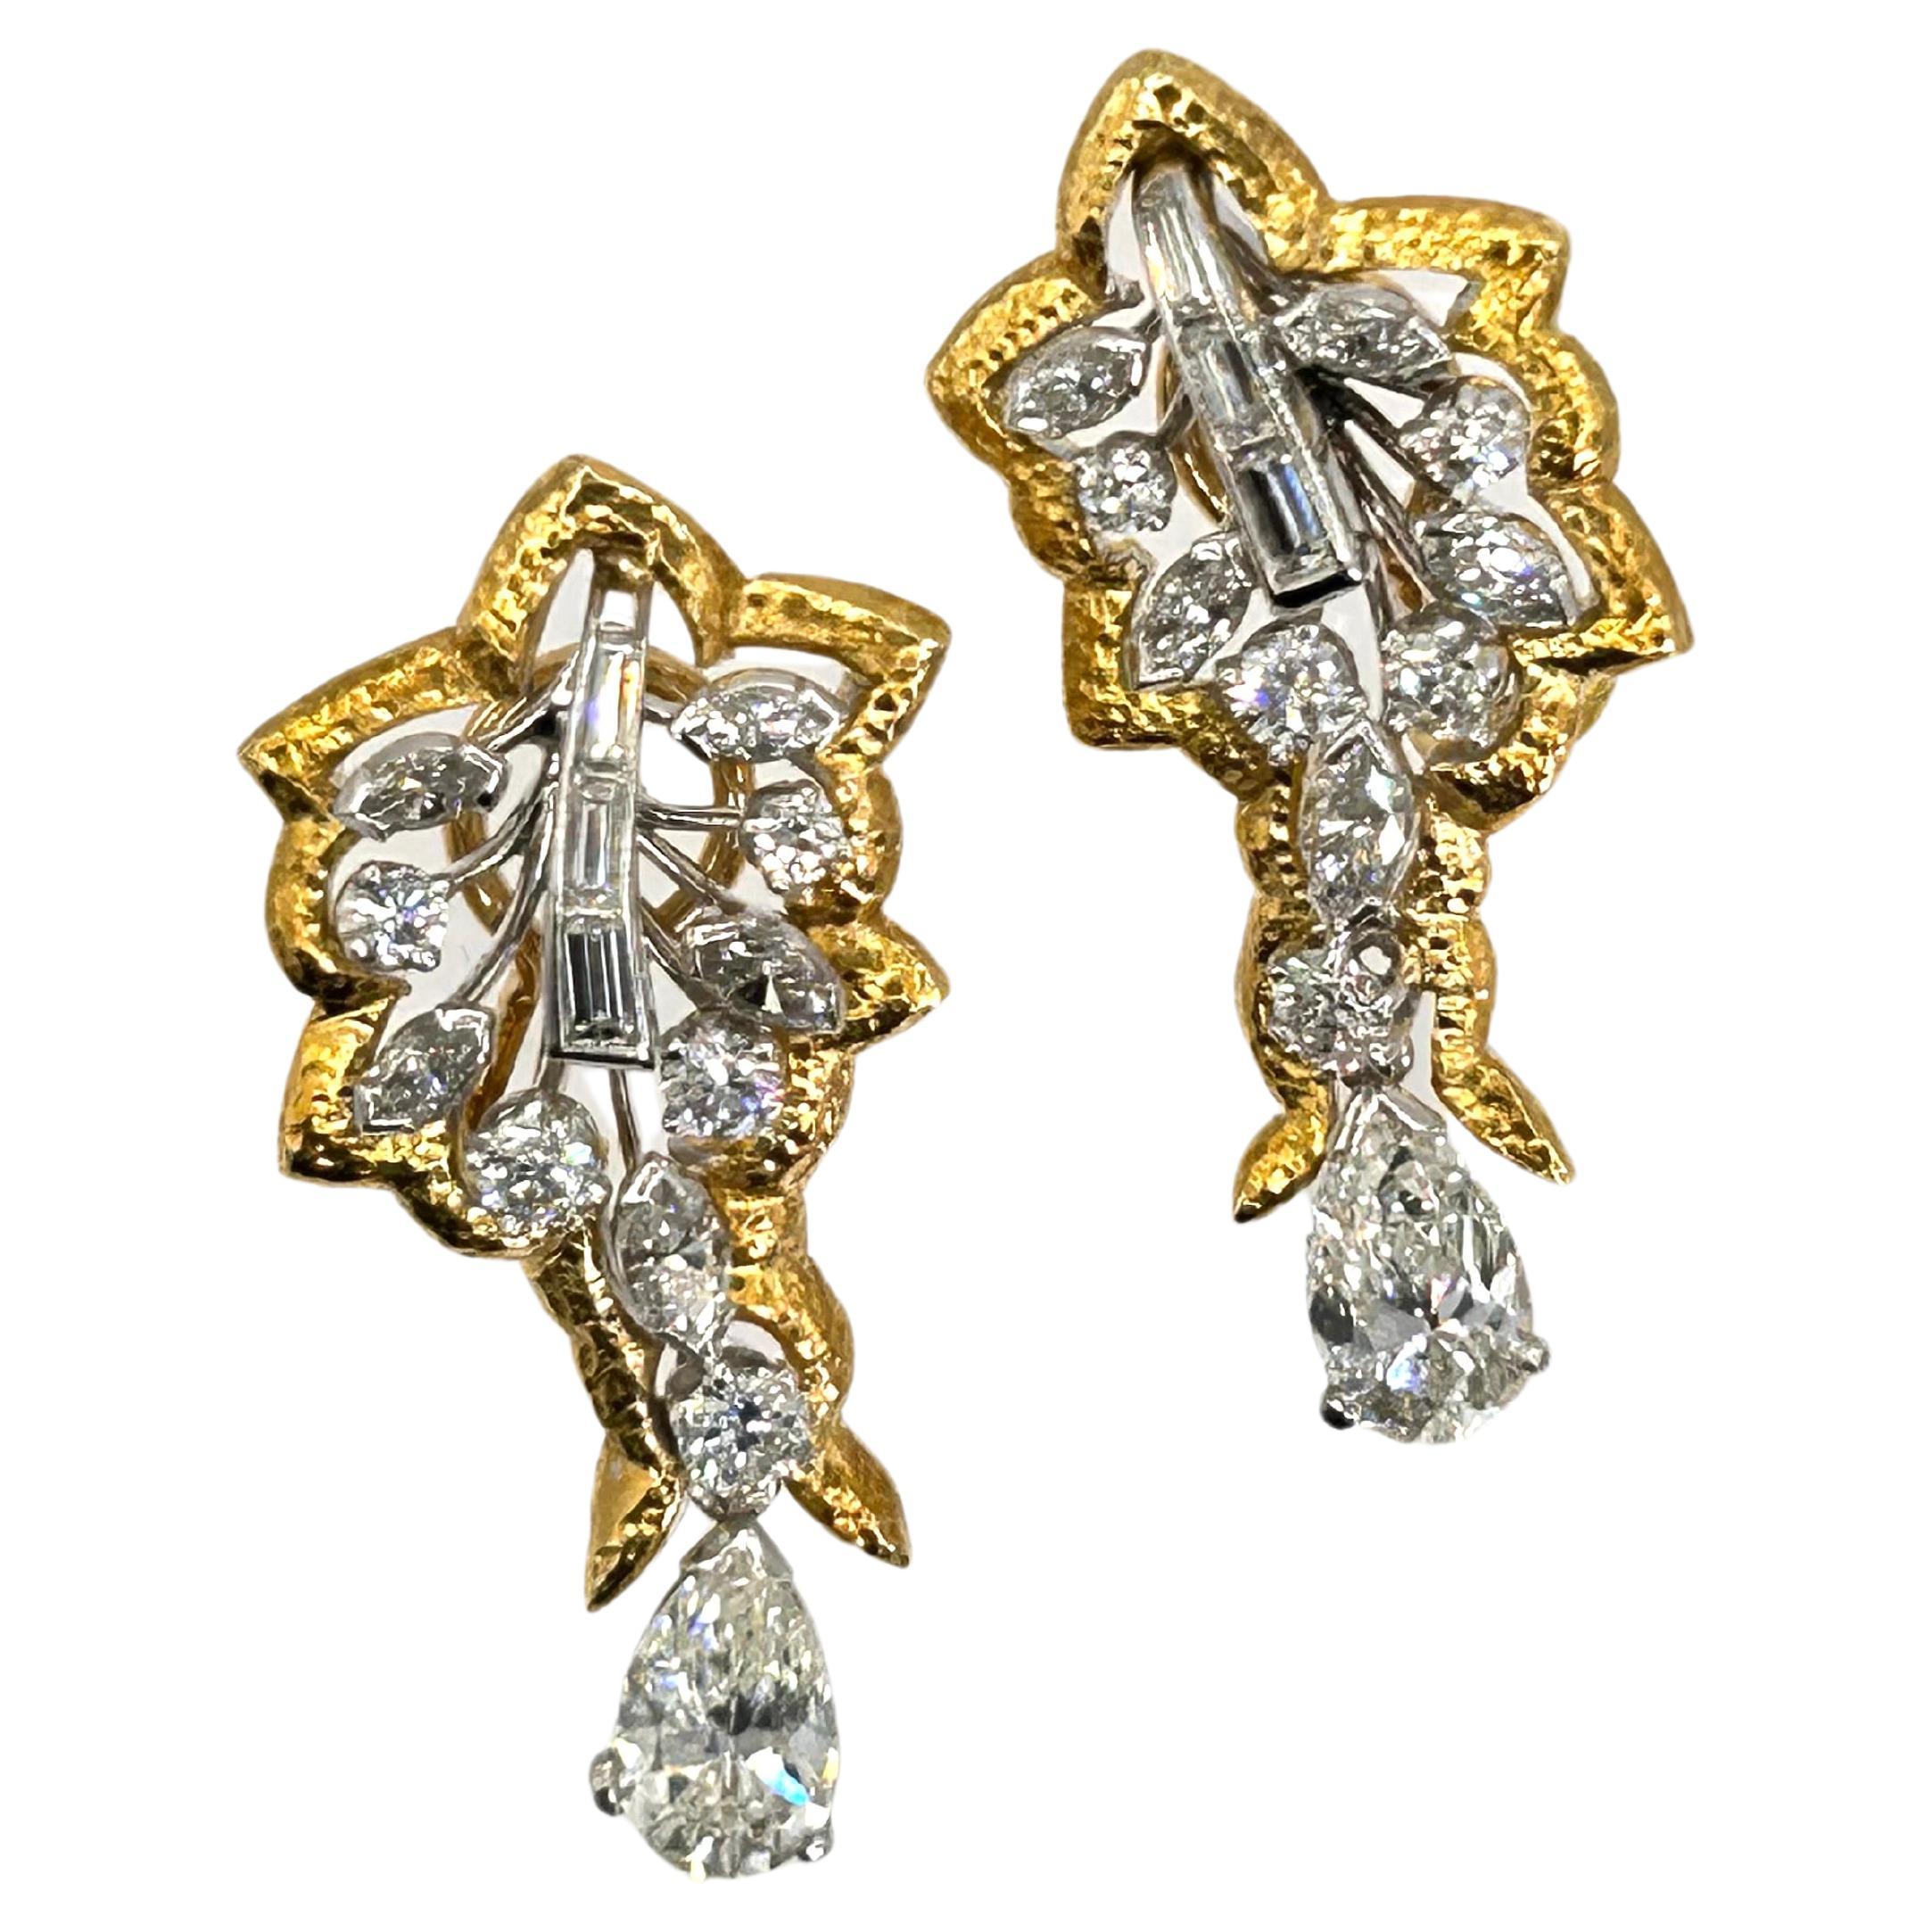 Estate Unique Design 18 Karat Yellow Gold and Platinum Earrings.
The Earrings have 2 Pear Shape Diamonds of 2.02 Carat Total Weight with average Clarity of VS and average Color of J.
Also containing 1.50 Carat Total Weight of Marquise, Round